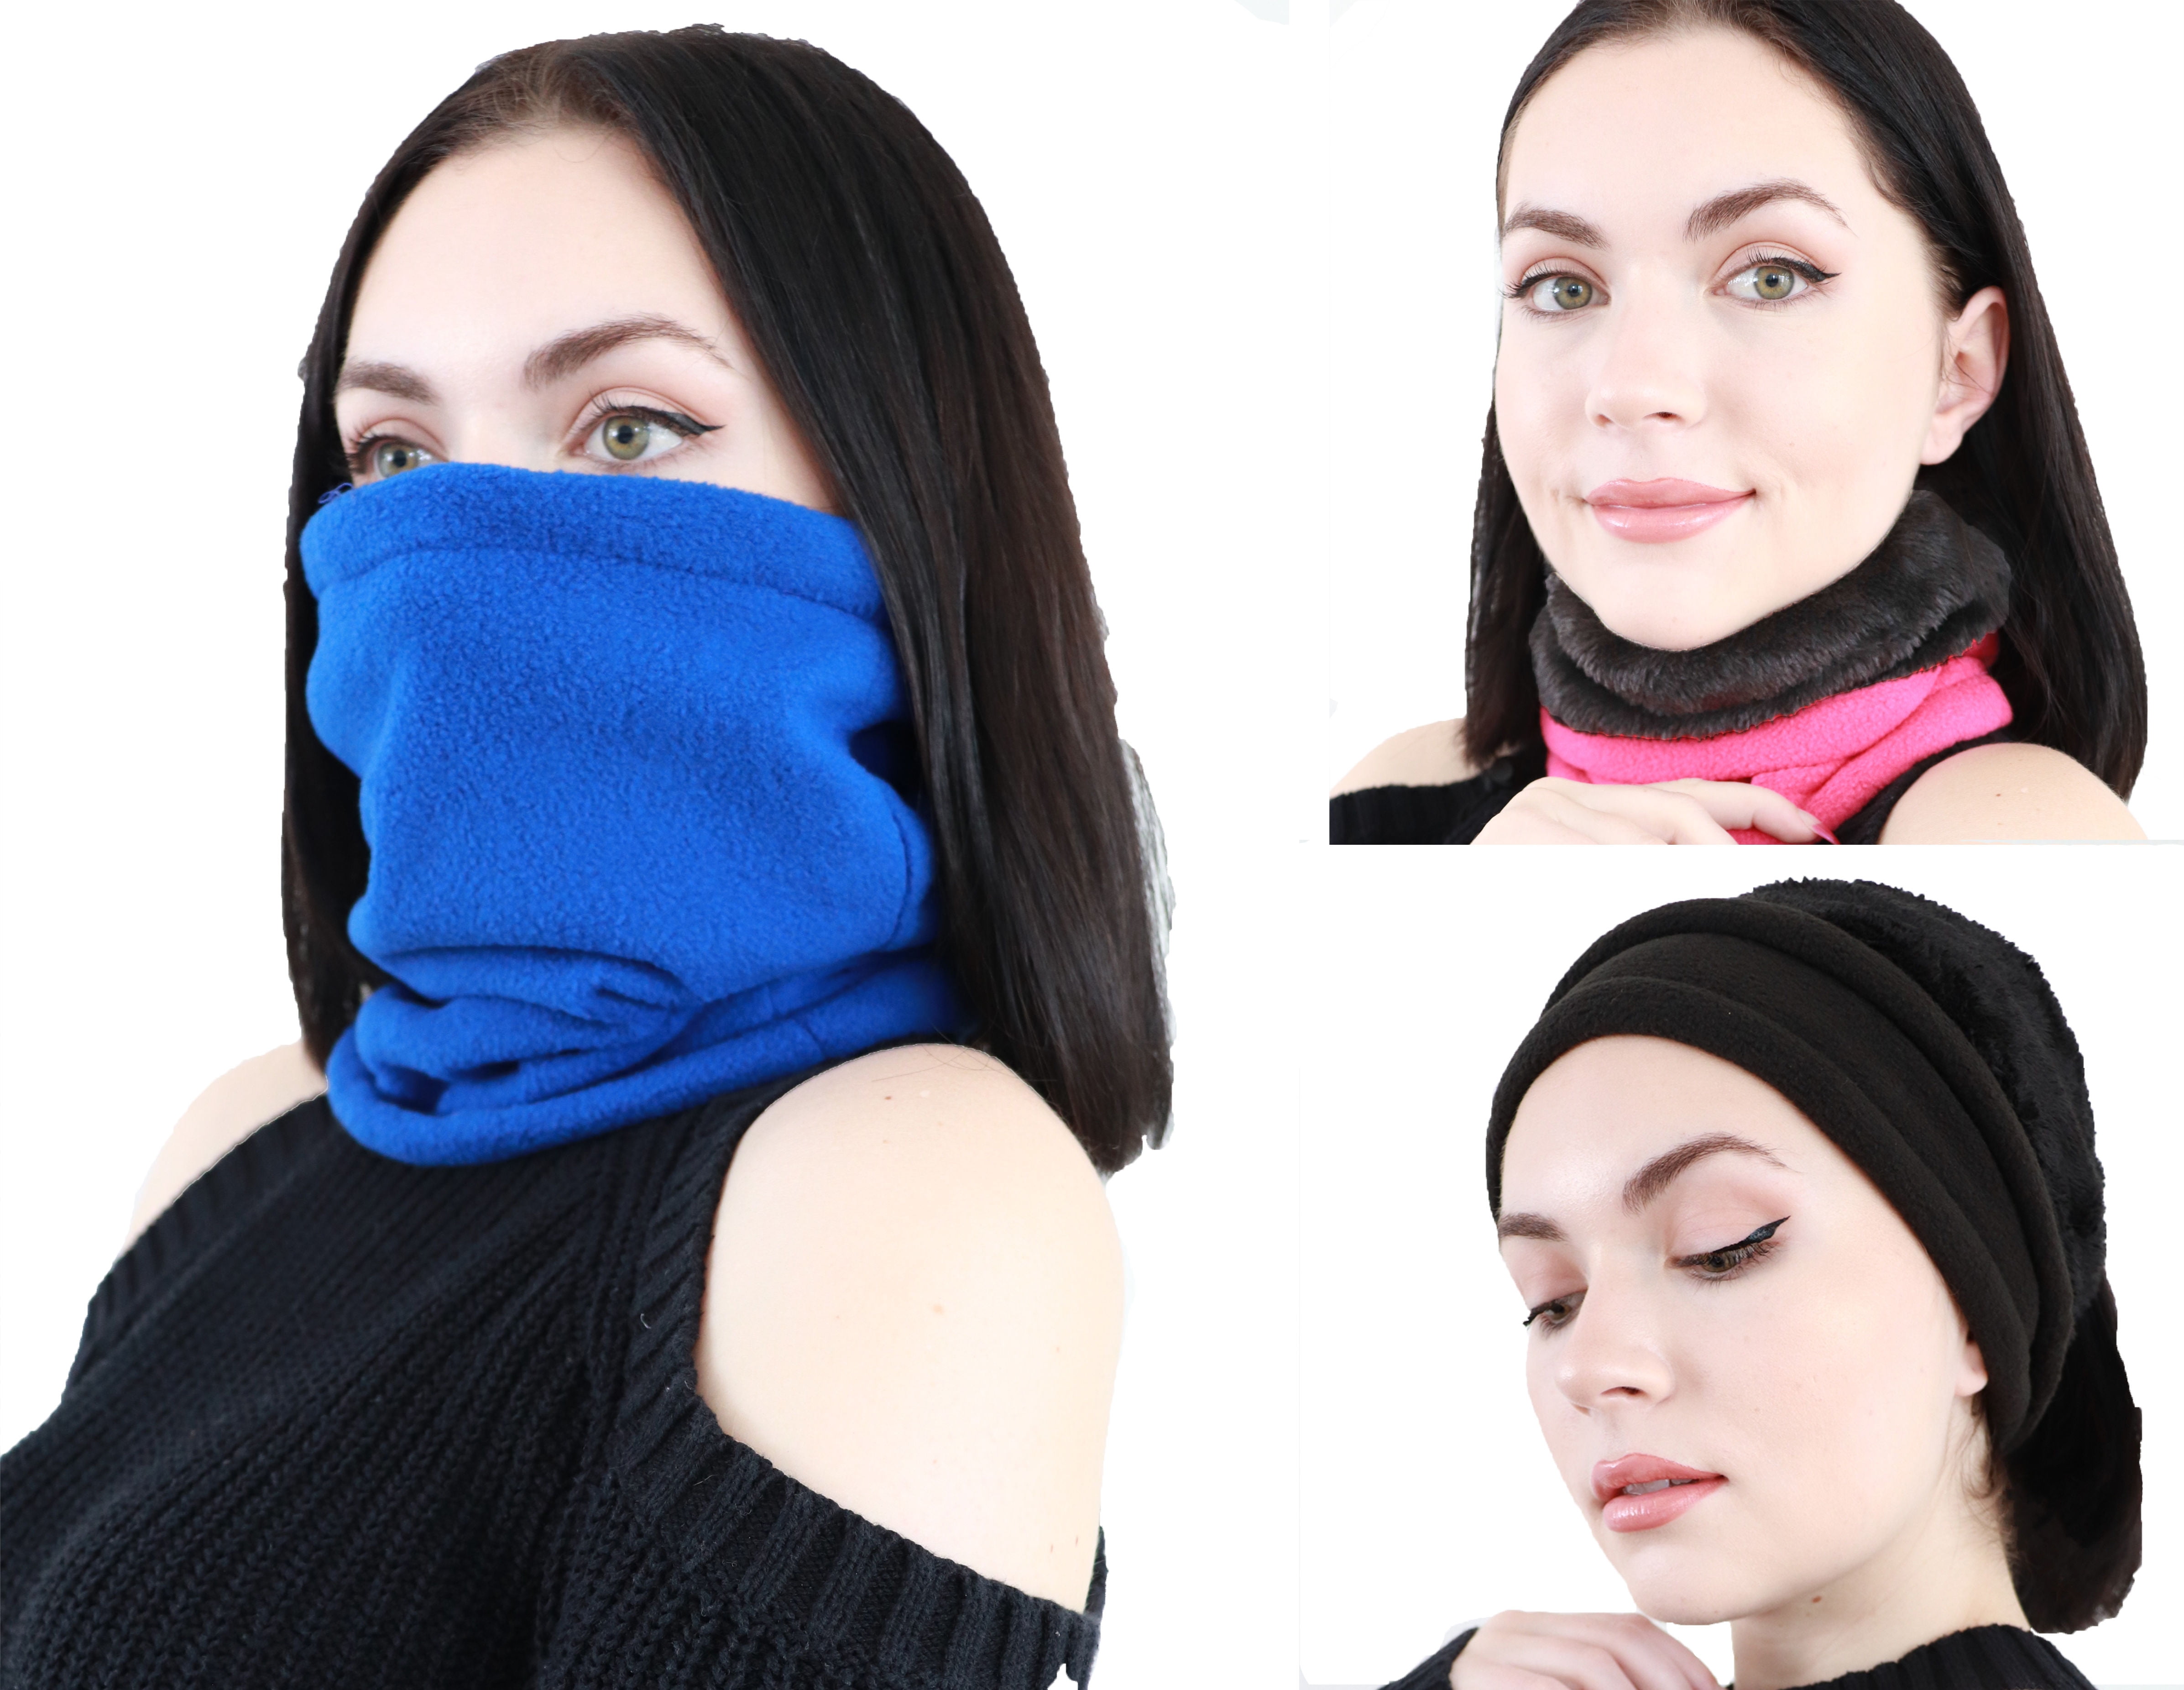 Neck Warmer Gaiter Windproof Warm Comfortable Balaclava Multifunctional Elastic Outdoor Headwear for Cycling Running Motorcycle Skiing Winter Thermal Fleece Face Scarf for Men and Women 